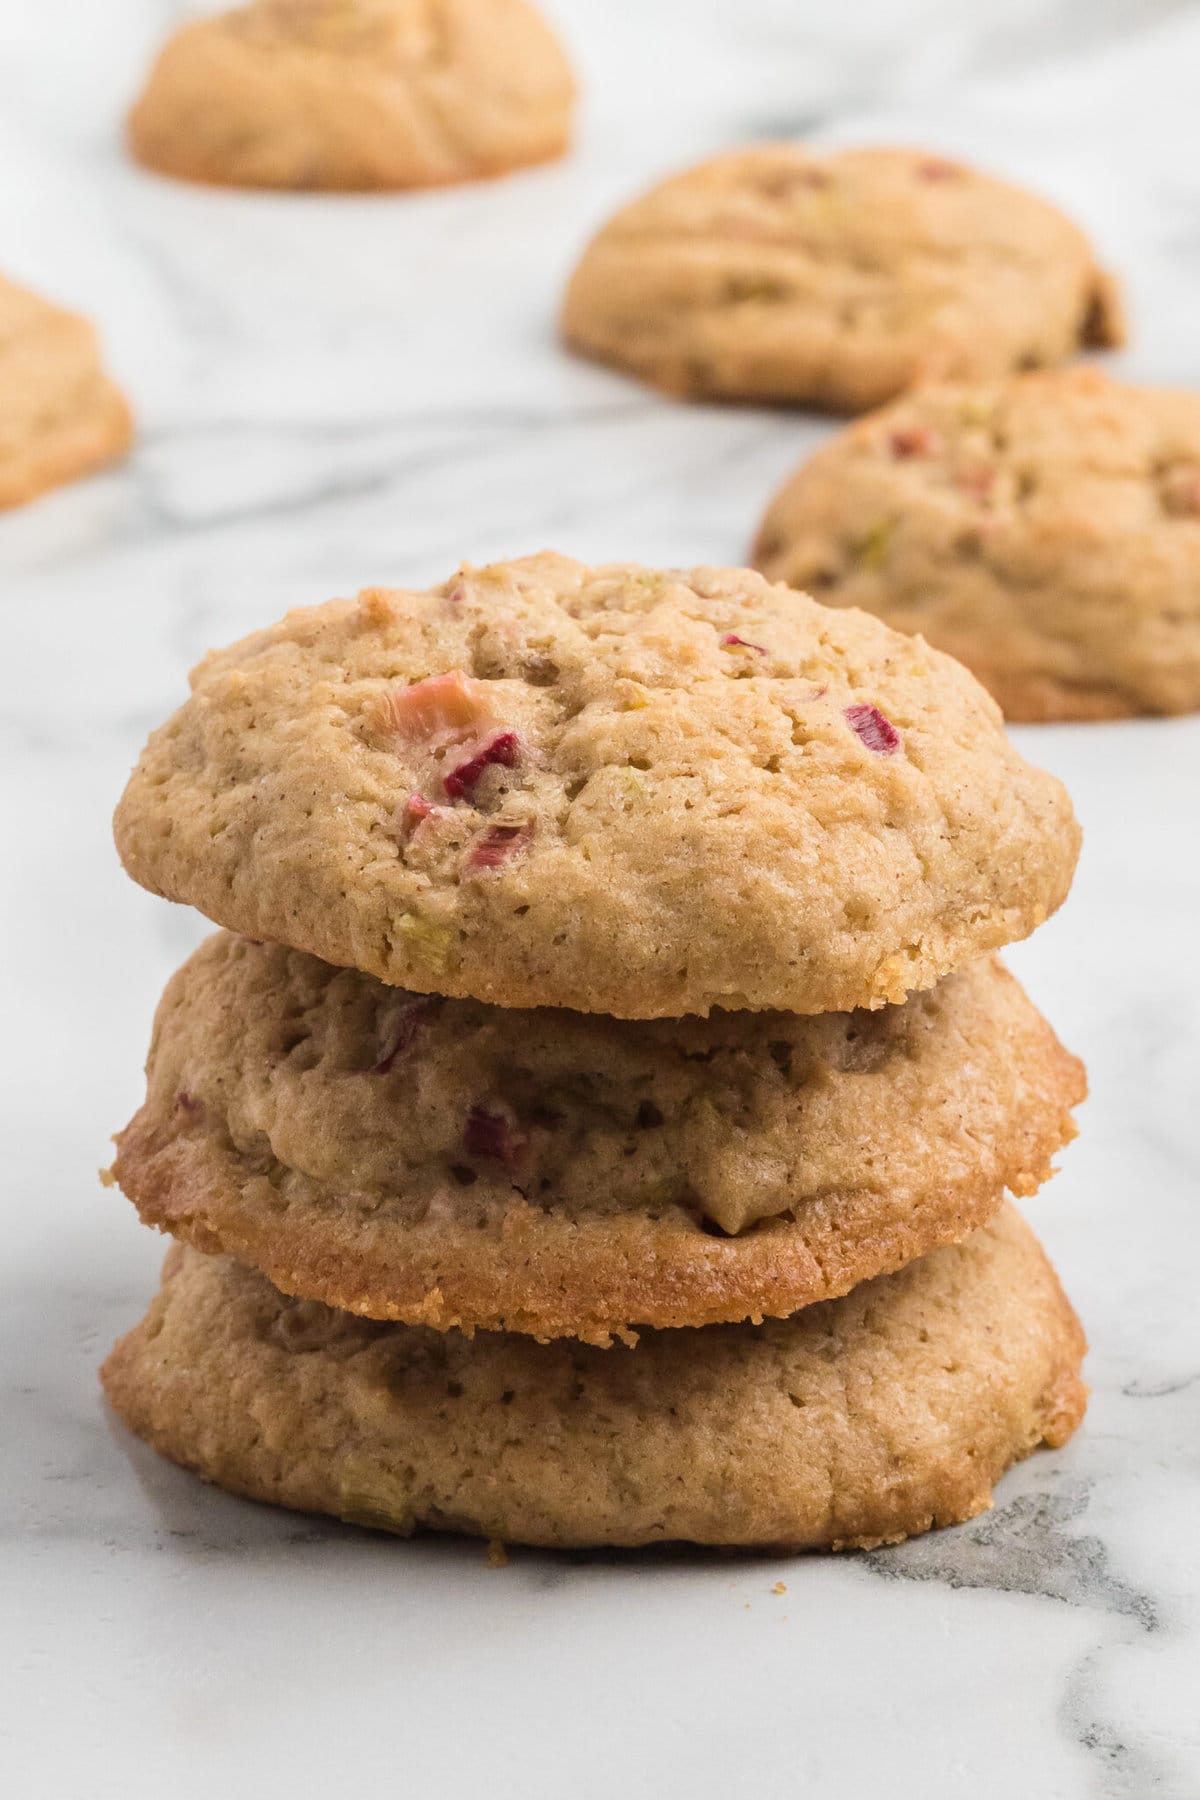 Rhubarb Cookies stacked on top of each other.